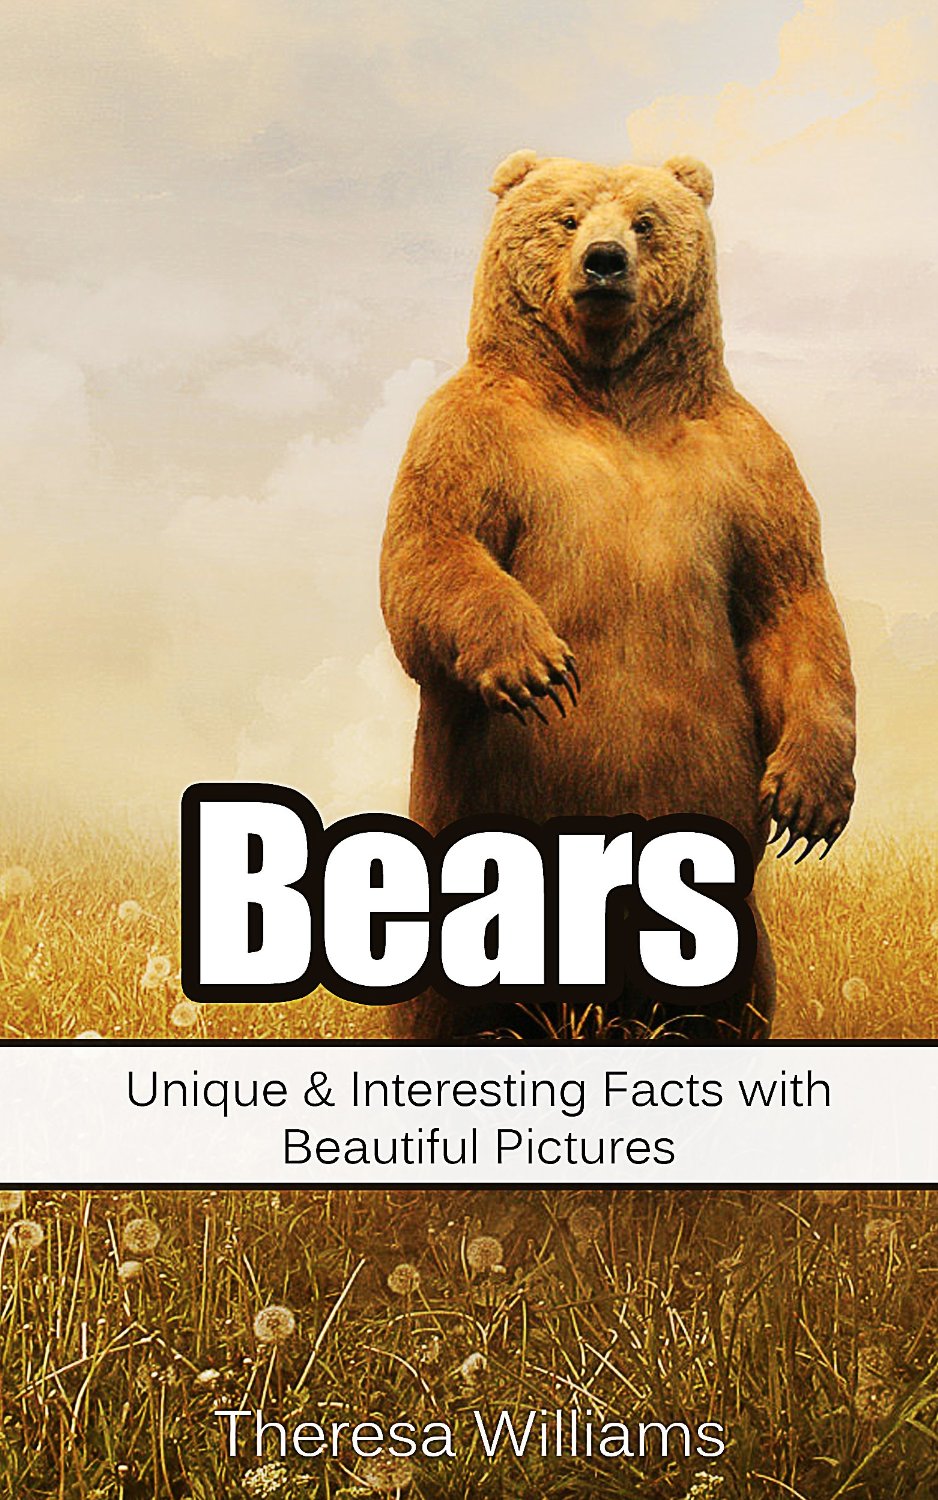 Bears: Unique & Interesting Facts with Beautiful Pictures By Theresa Williams